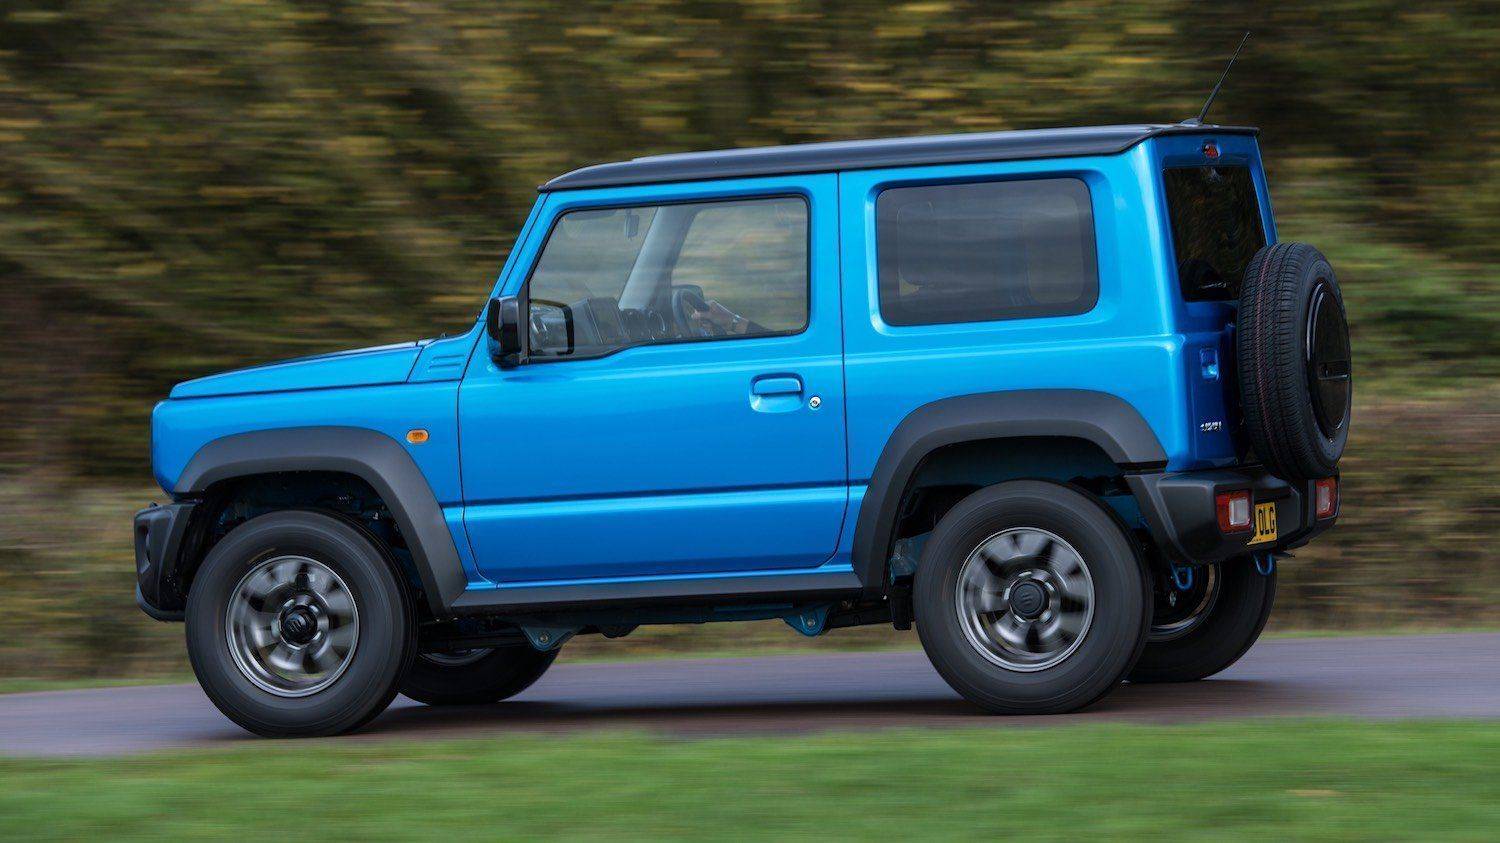 Scanlan-takes-the-All-New-Jimny-on-and-off-road-10.jpg